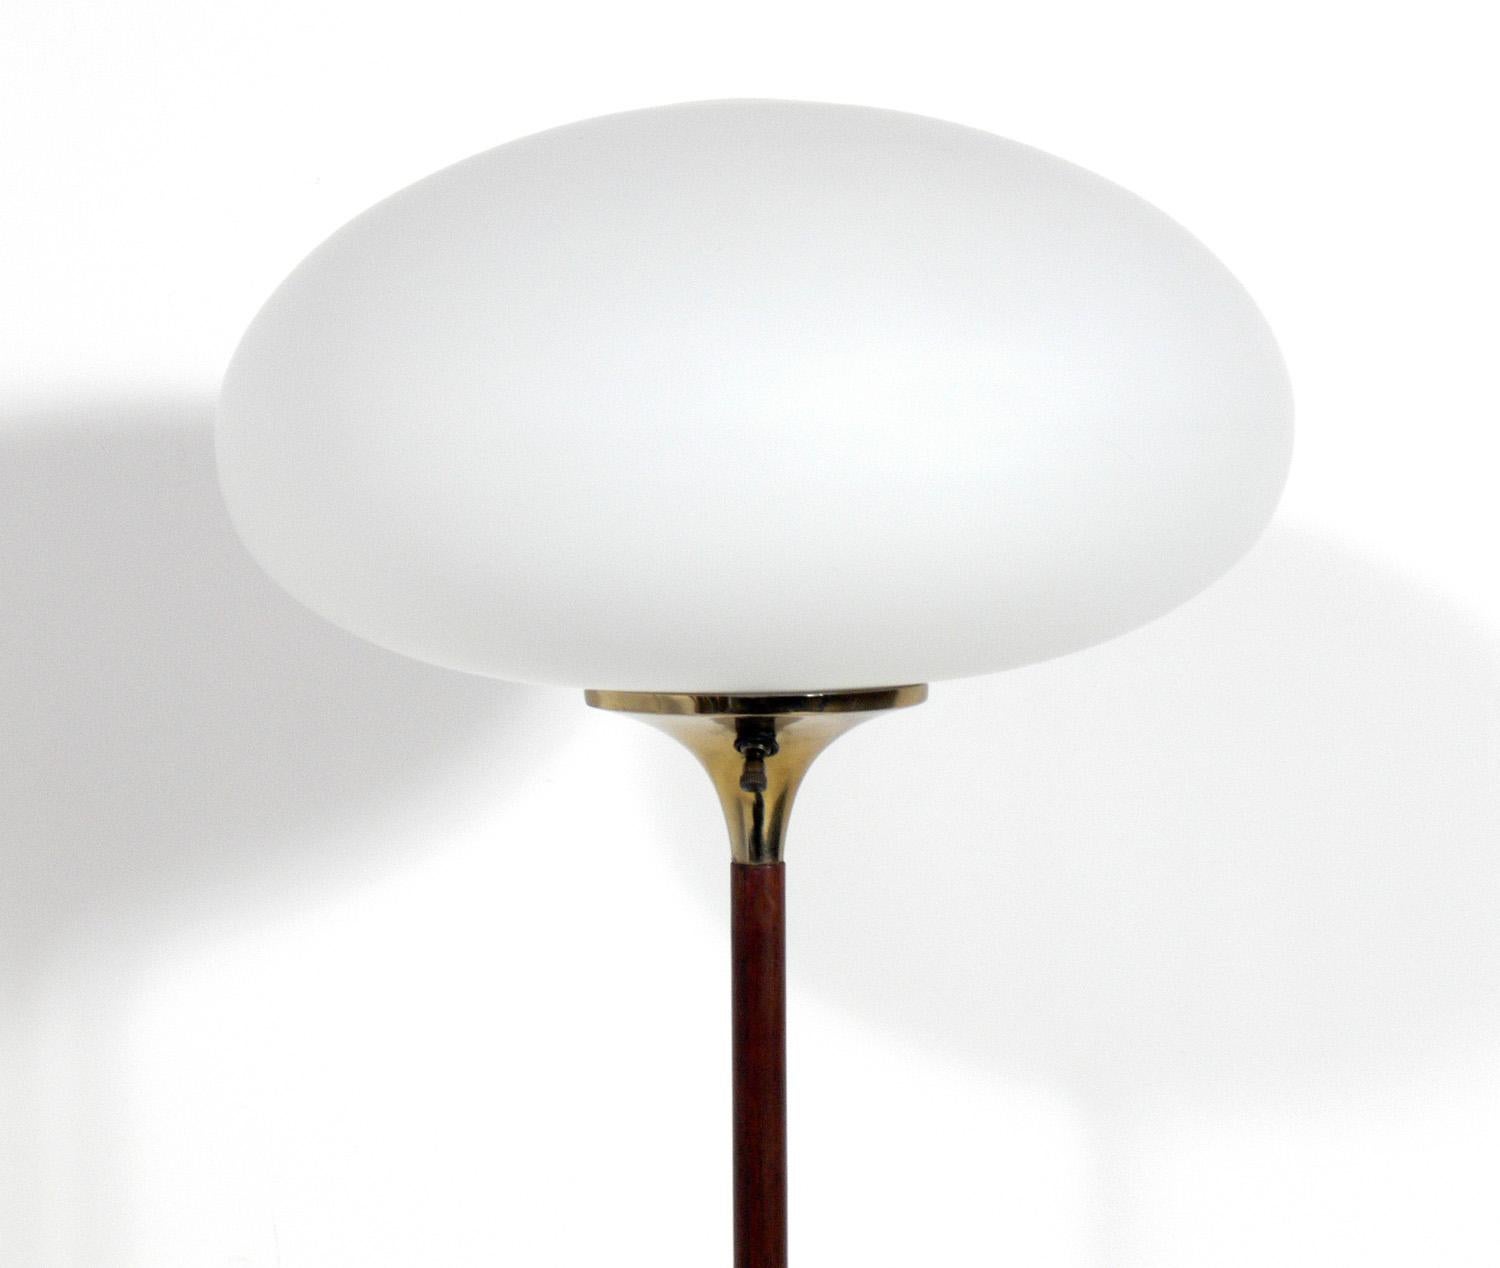 Iconic midcentury laurel floor lamp, executed in rosewood veneer, brass plated metal and original milk glass shade. Rewired and ready to use.